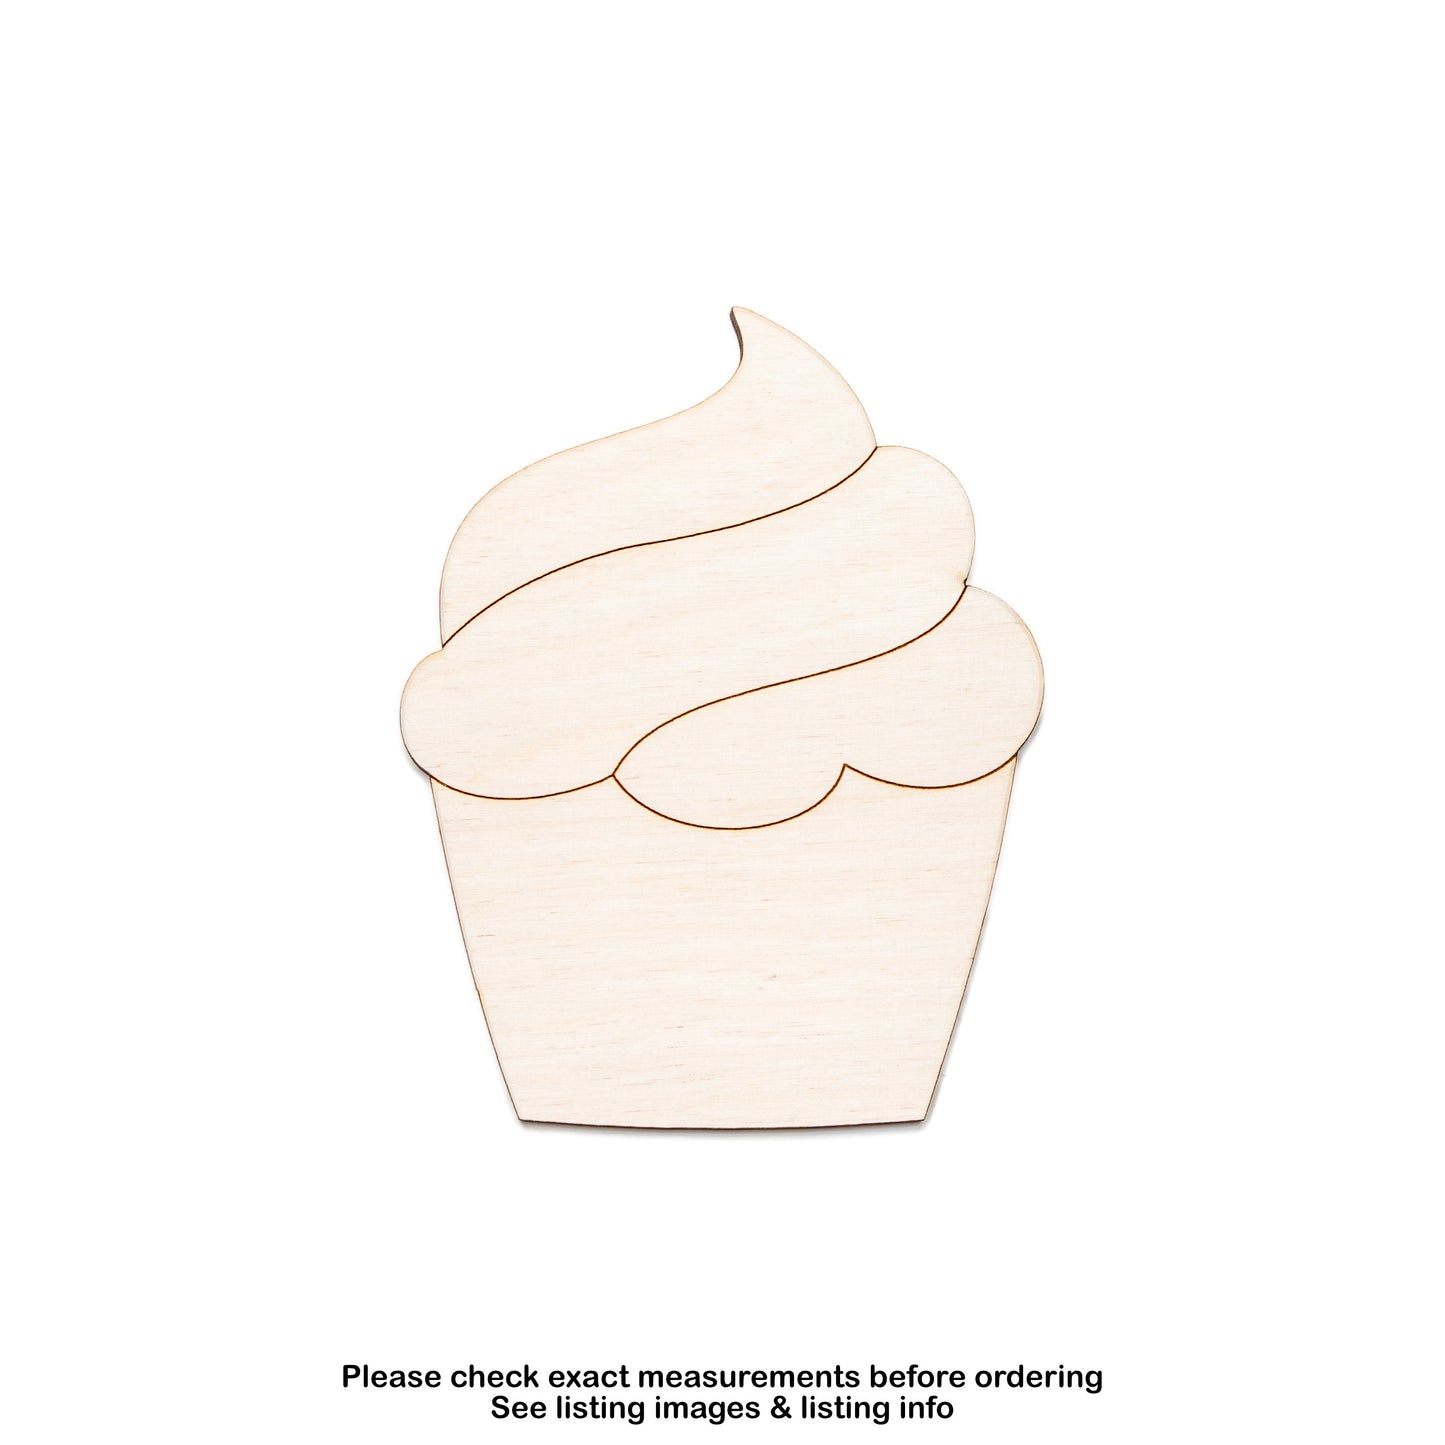 Cupcake Wood Cutout-Sweets And Desserts Theme Wood Decor-Party Crafts-Various Sizes-DIY Crafts-Frosted Cupcake decor-Food Shapes-Paintable